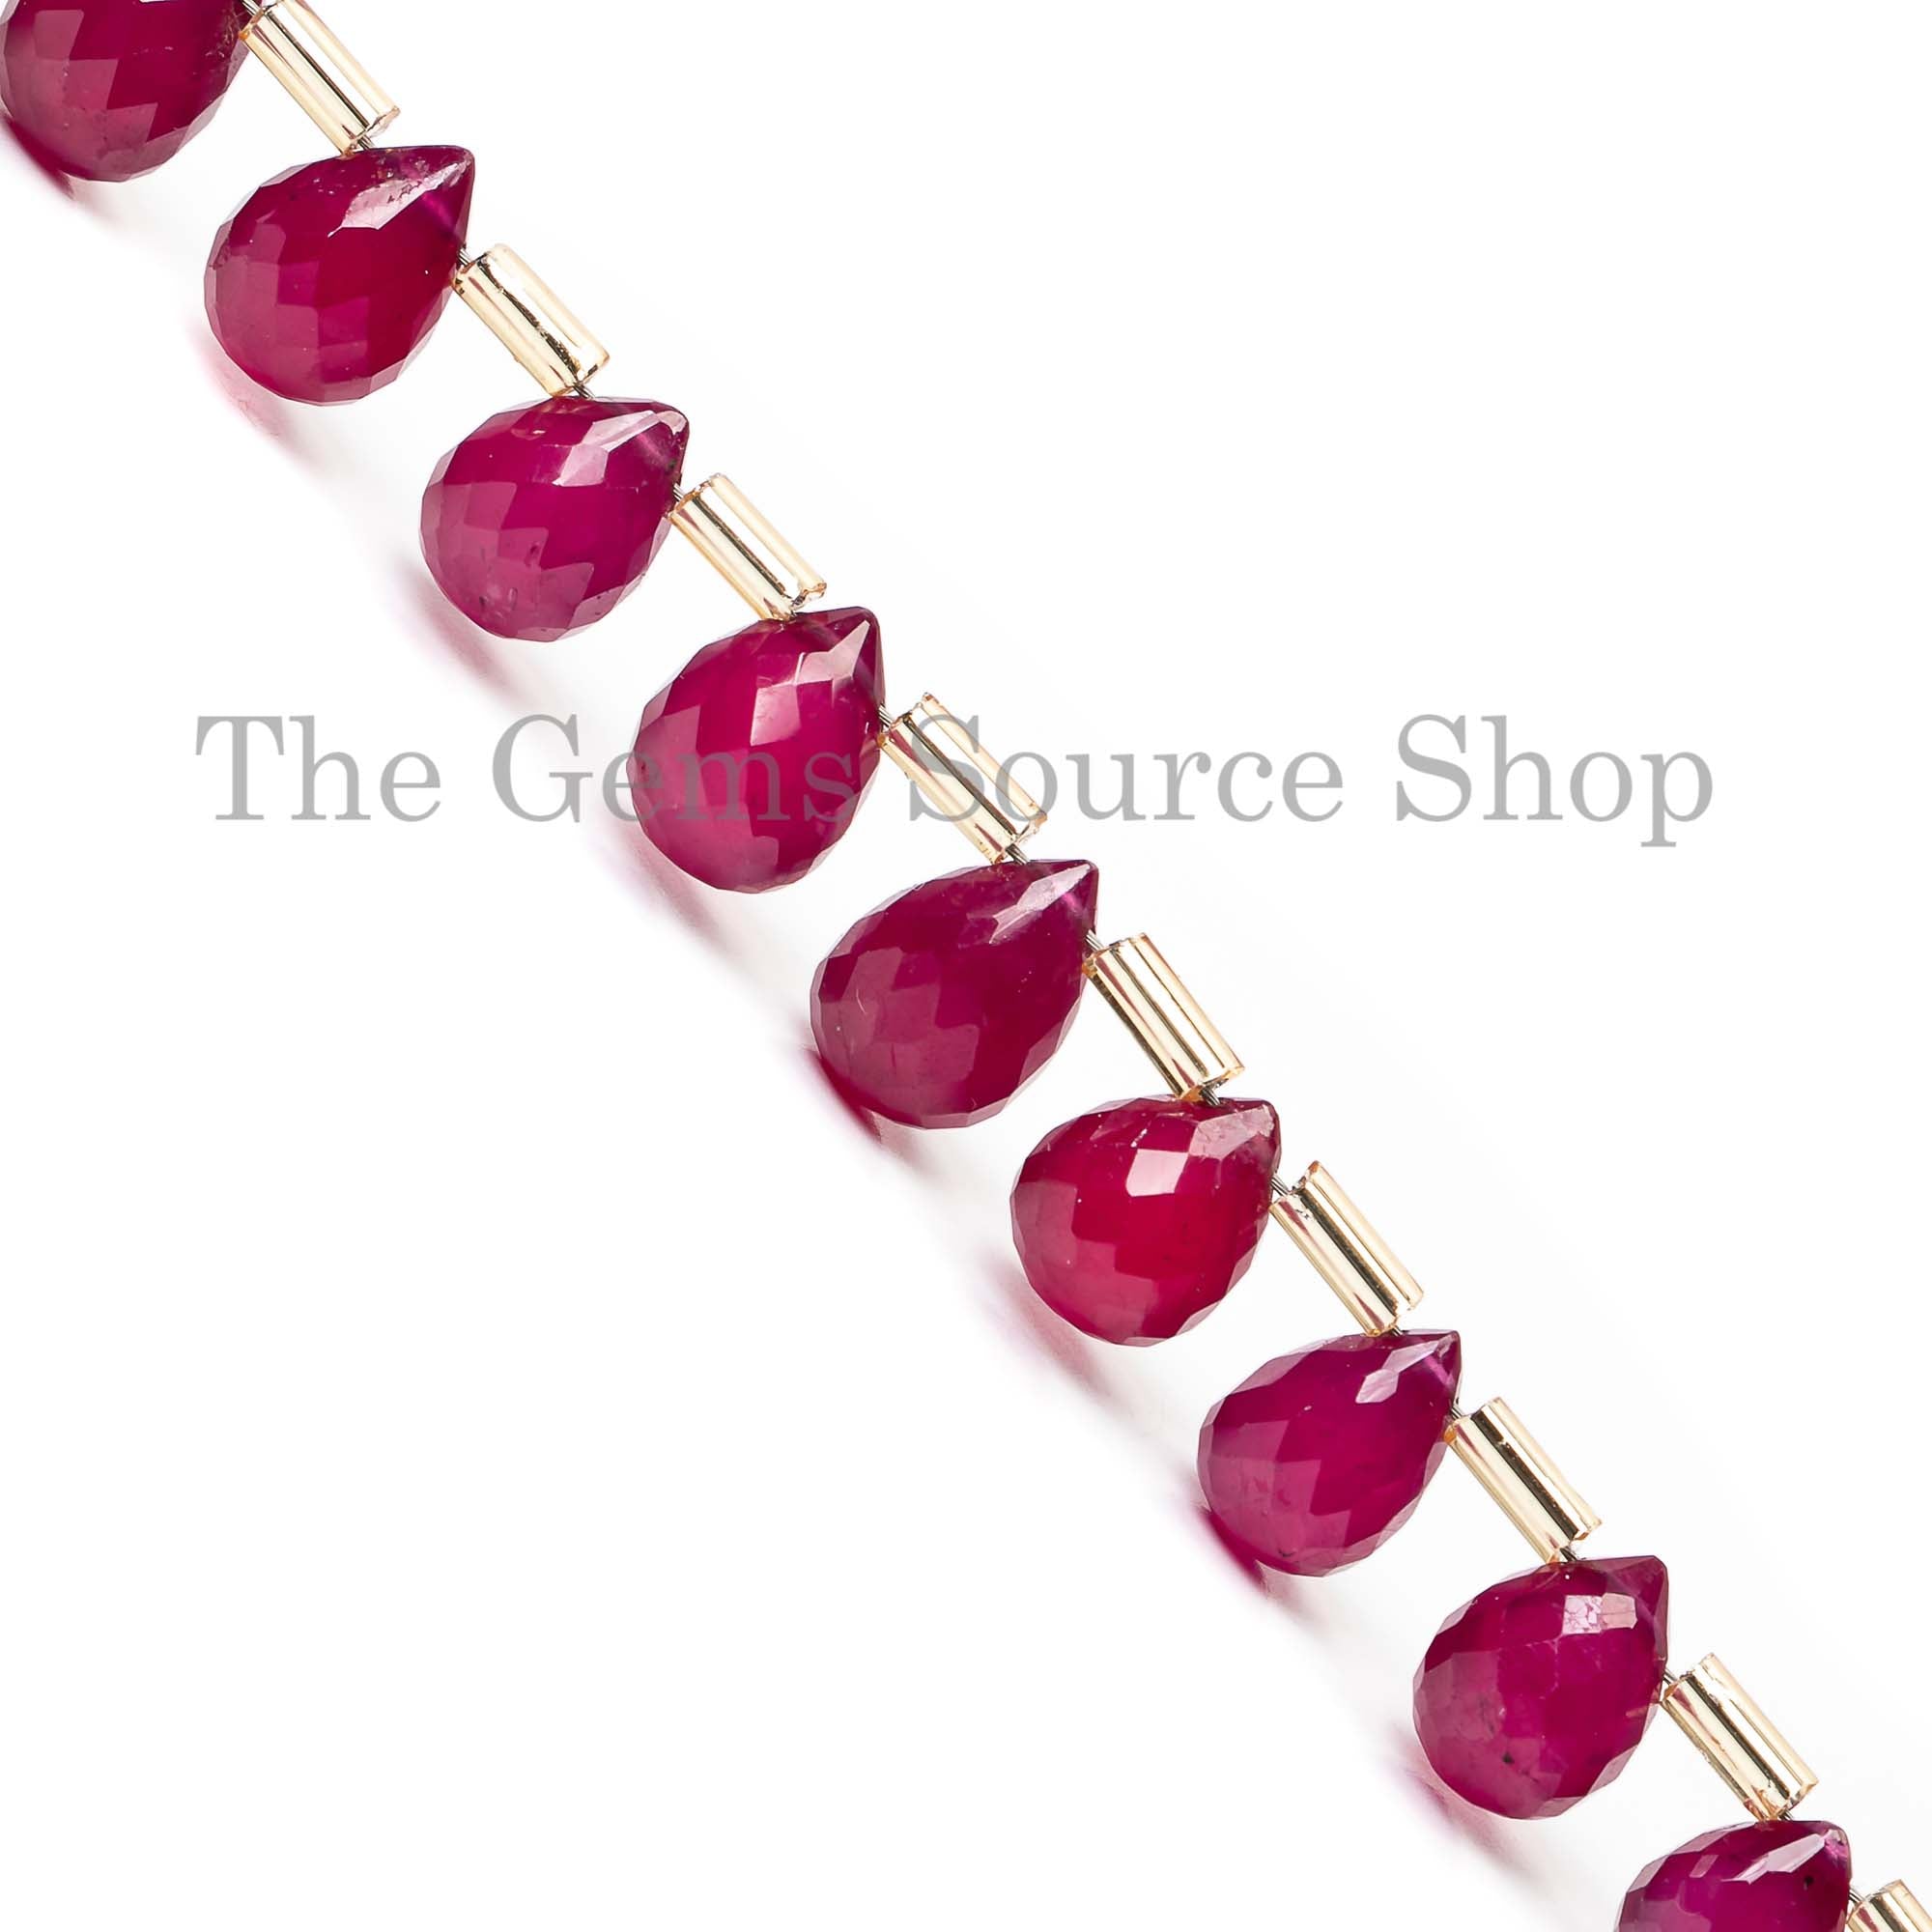 Ruby Faceted Beads, Ruby Drop Shape Beads, Faceted Drop Beads, Ruby Gemstone Beads